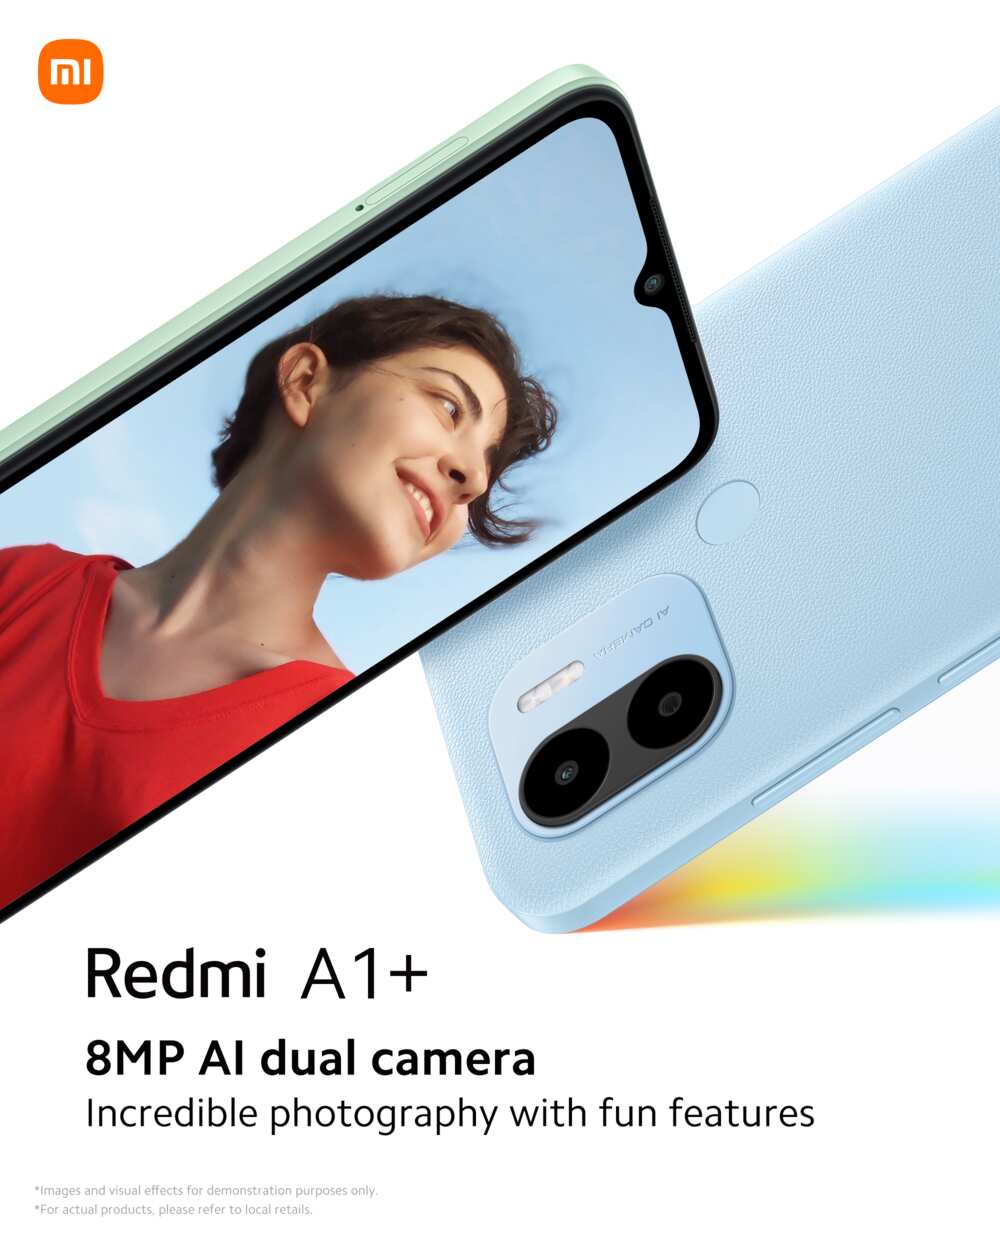 Redmi A1+: The Most Affordable, Versatile and Stylish Redmi Yet